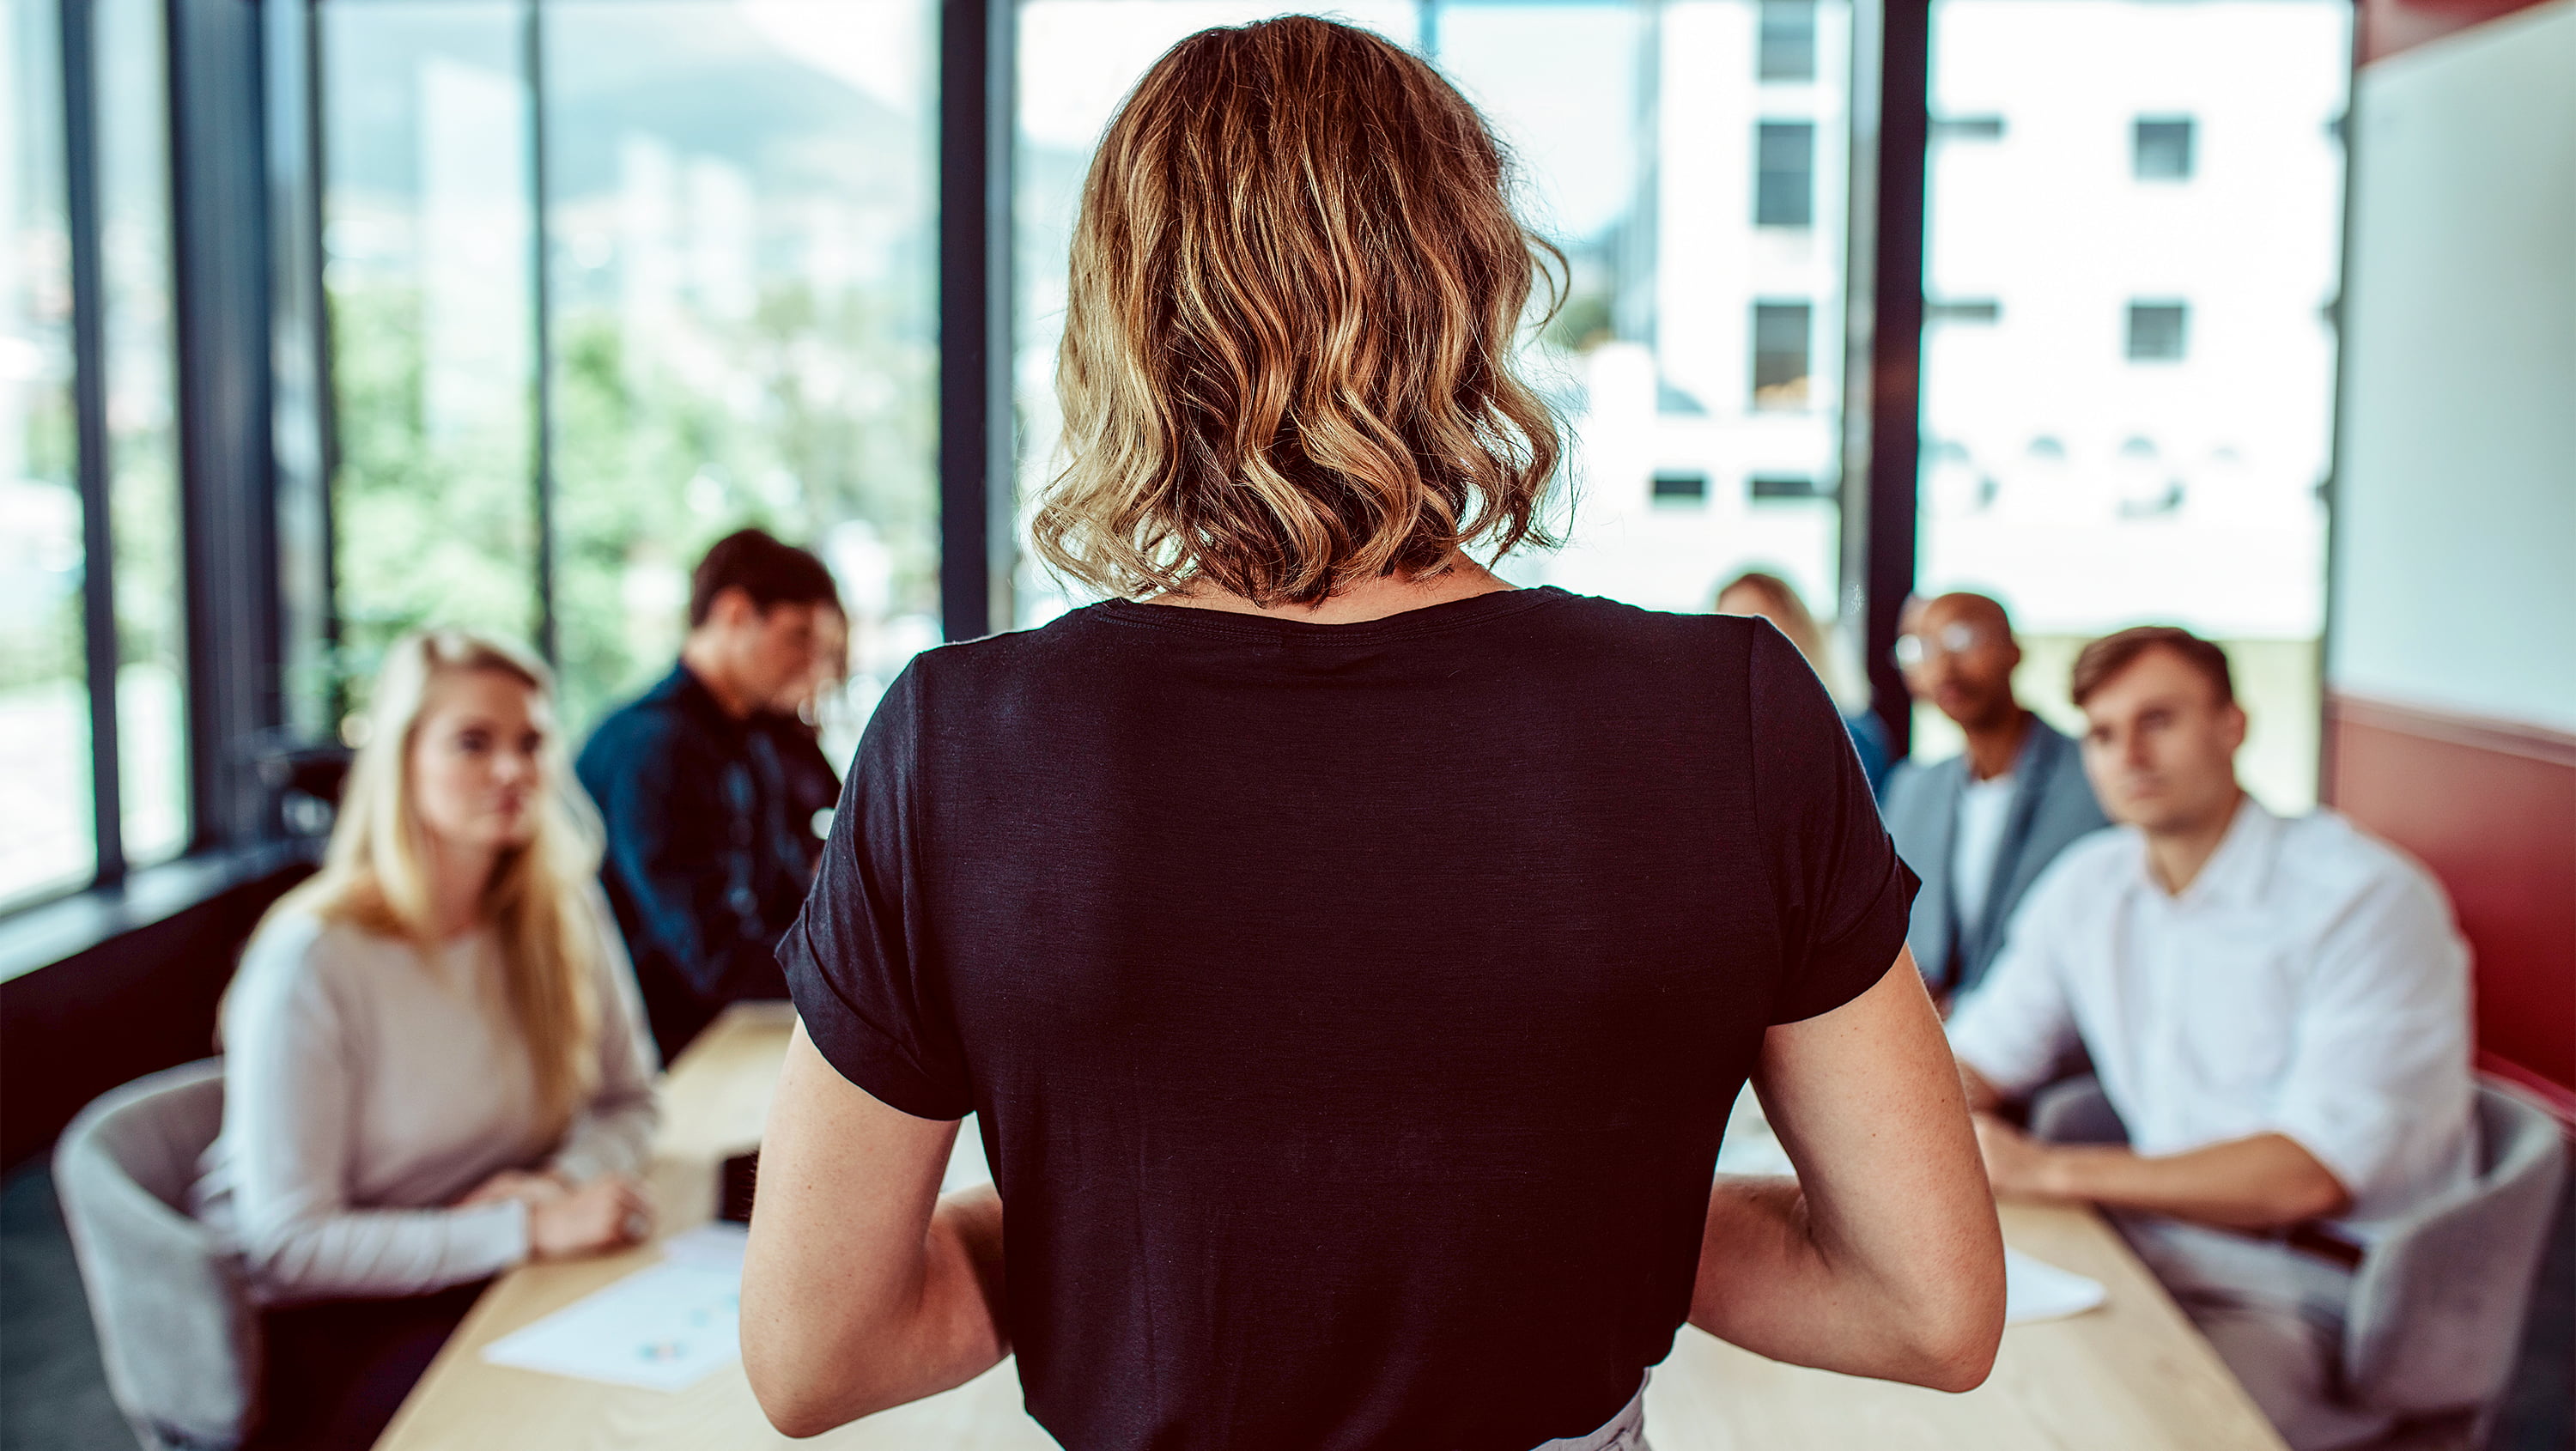 Woman presents to board room full of employees. (Photo: Getty Images)